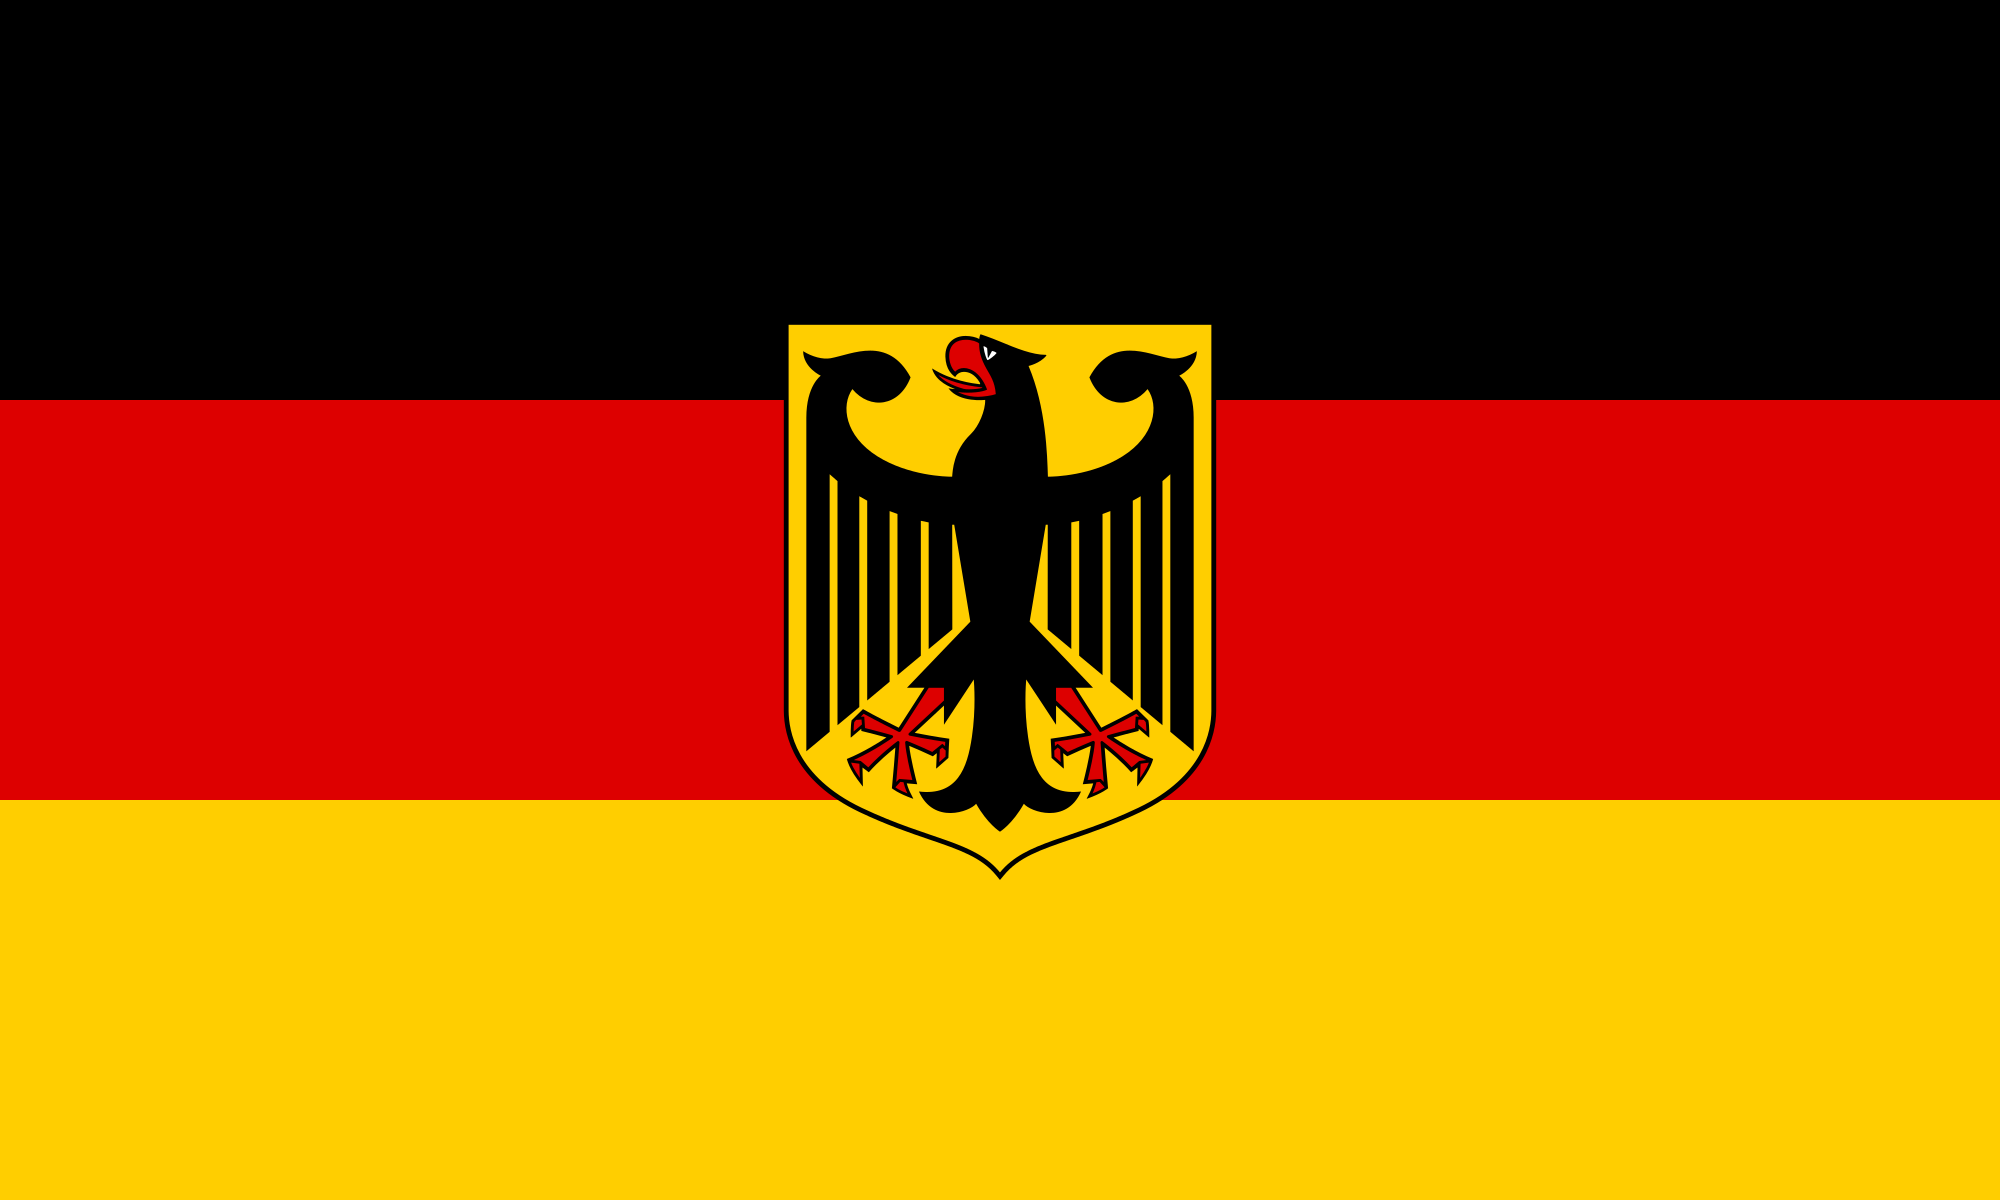 https://upload.wikimedia.org/wikipedia/commons/thumb/7/7e/Flag_of_Germany_(unoff).svg/2000px-Flag_of_Germany_(unoff).svg.png